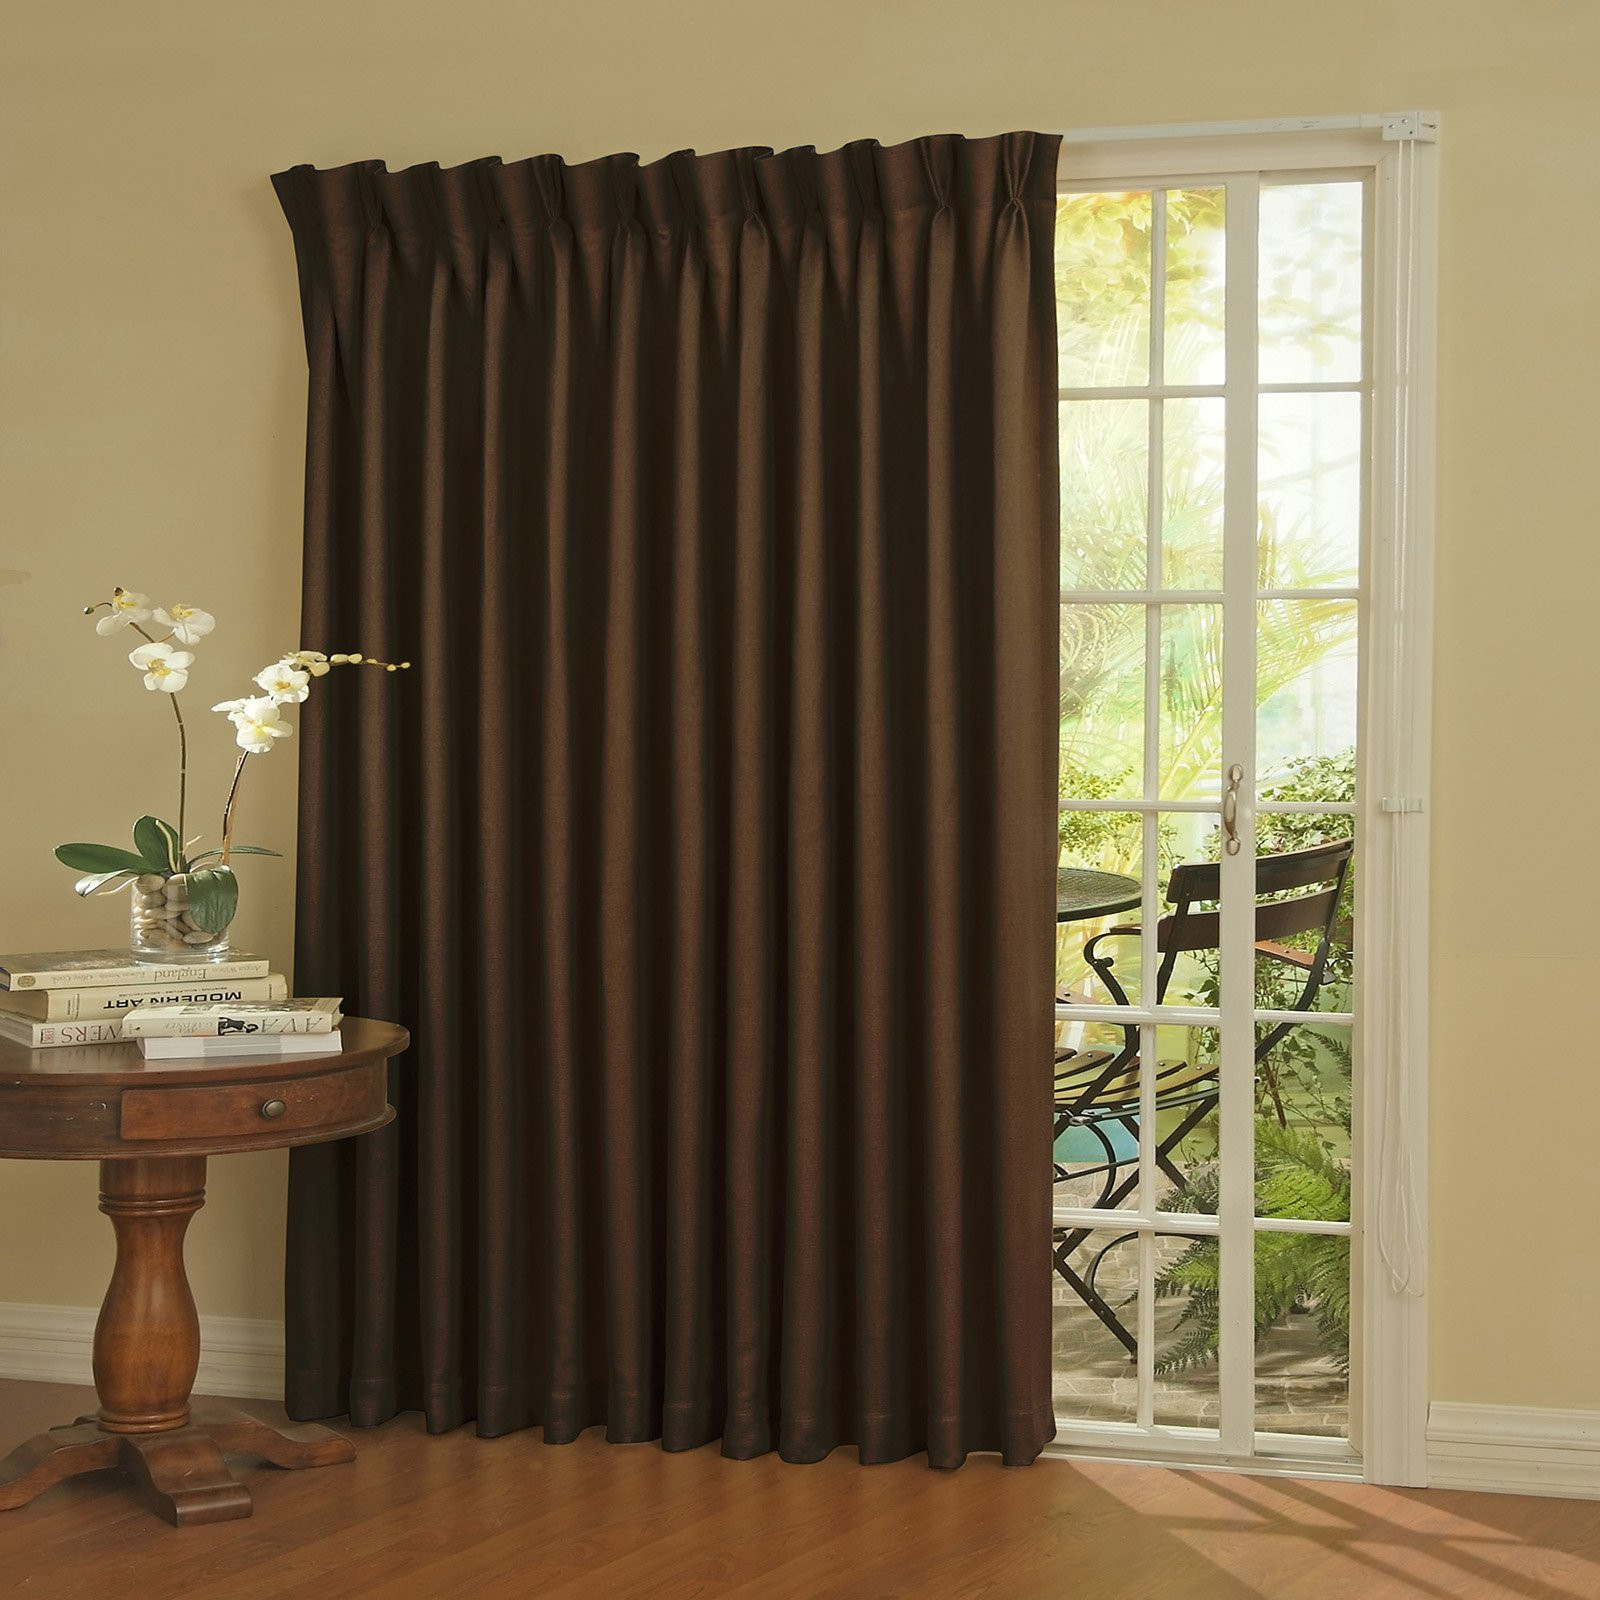 Best ideas about Patio Door Curtain
. Save or Pin Eclipse Thermal Blackout Patio Door Curtain Panel Now.